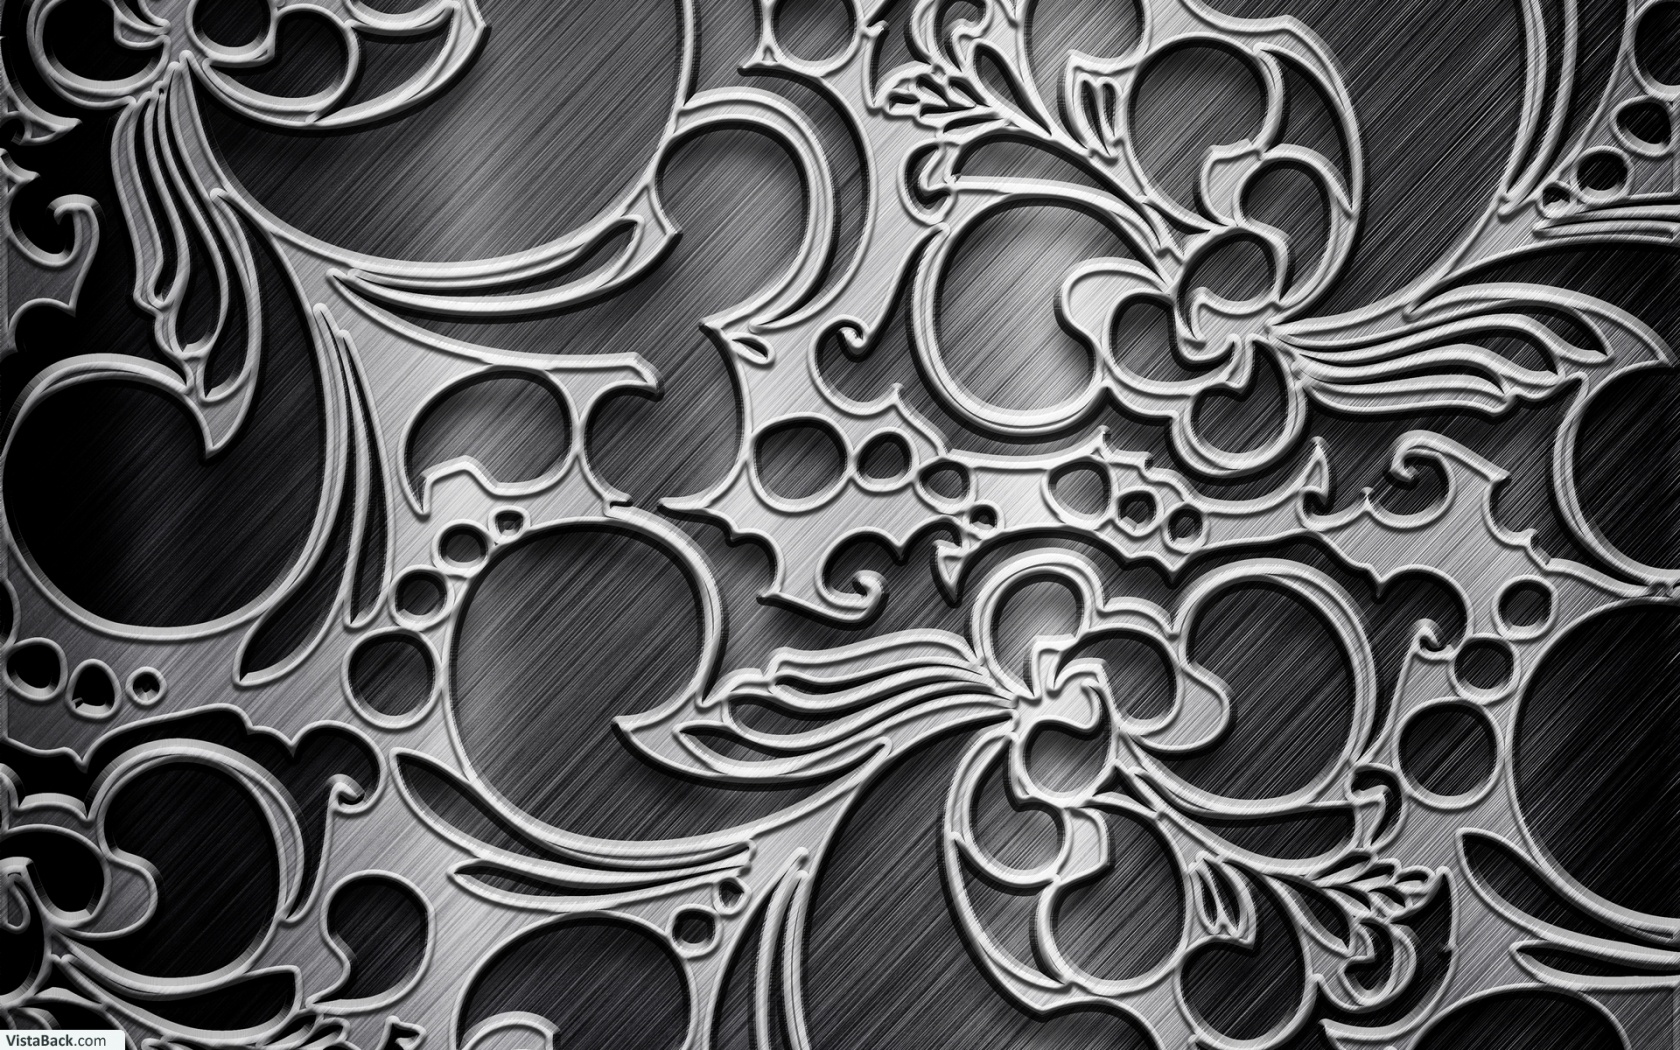 47 Black And Silver Background Wallpaper On Wallpapersafari